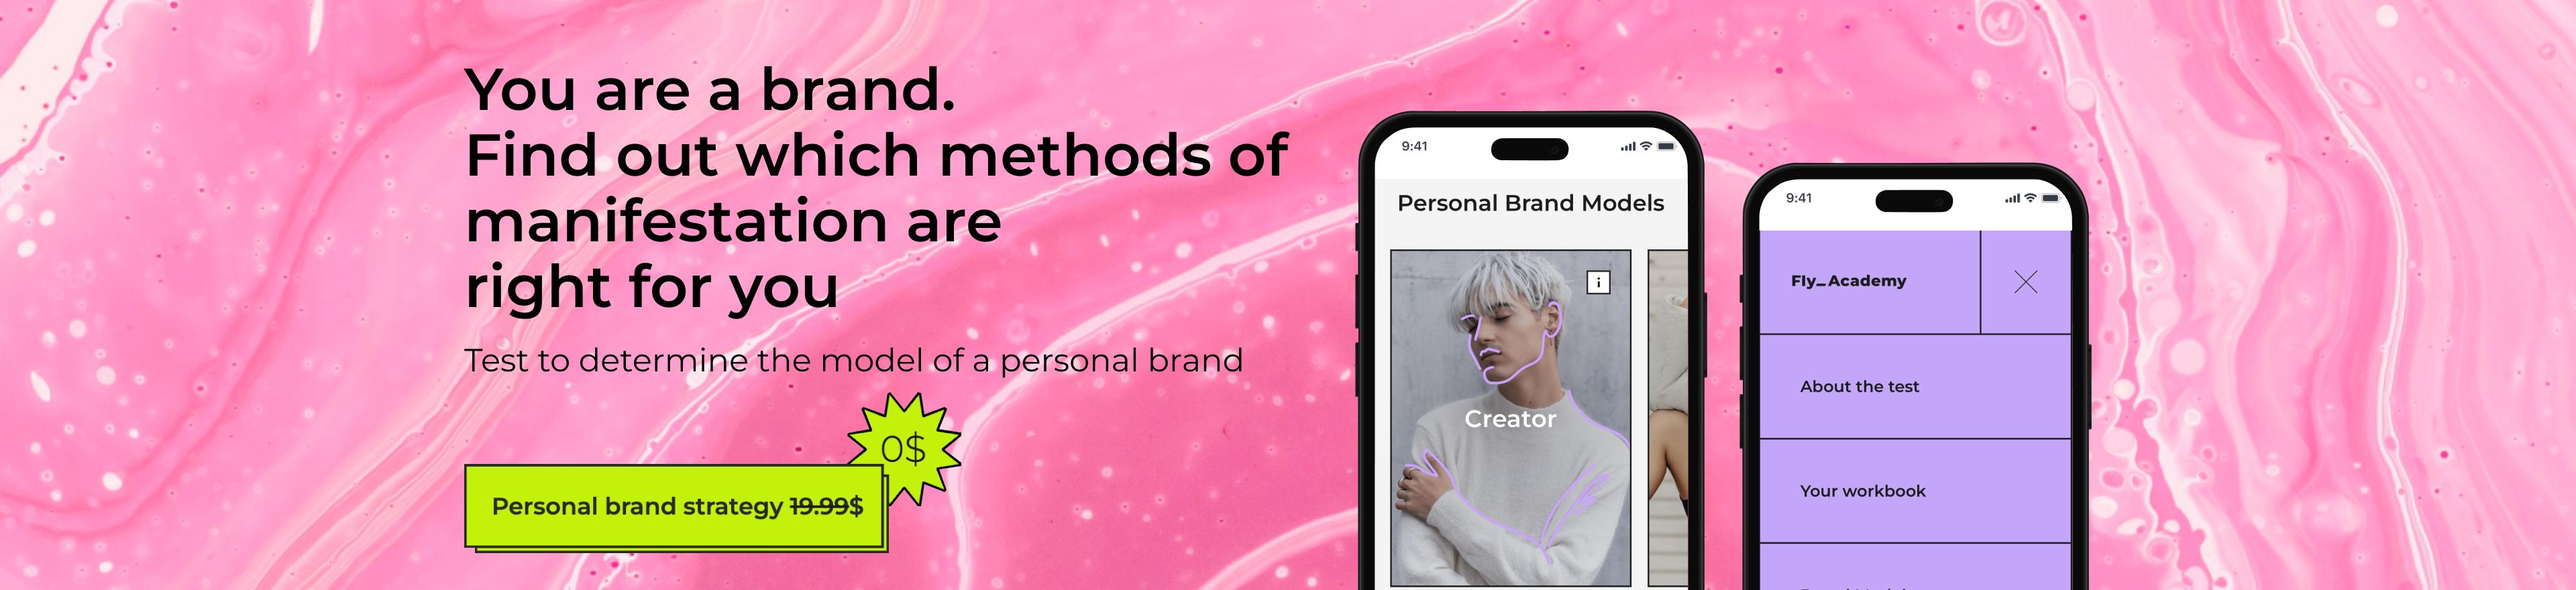 Personal Brand Model cover